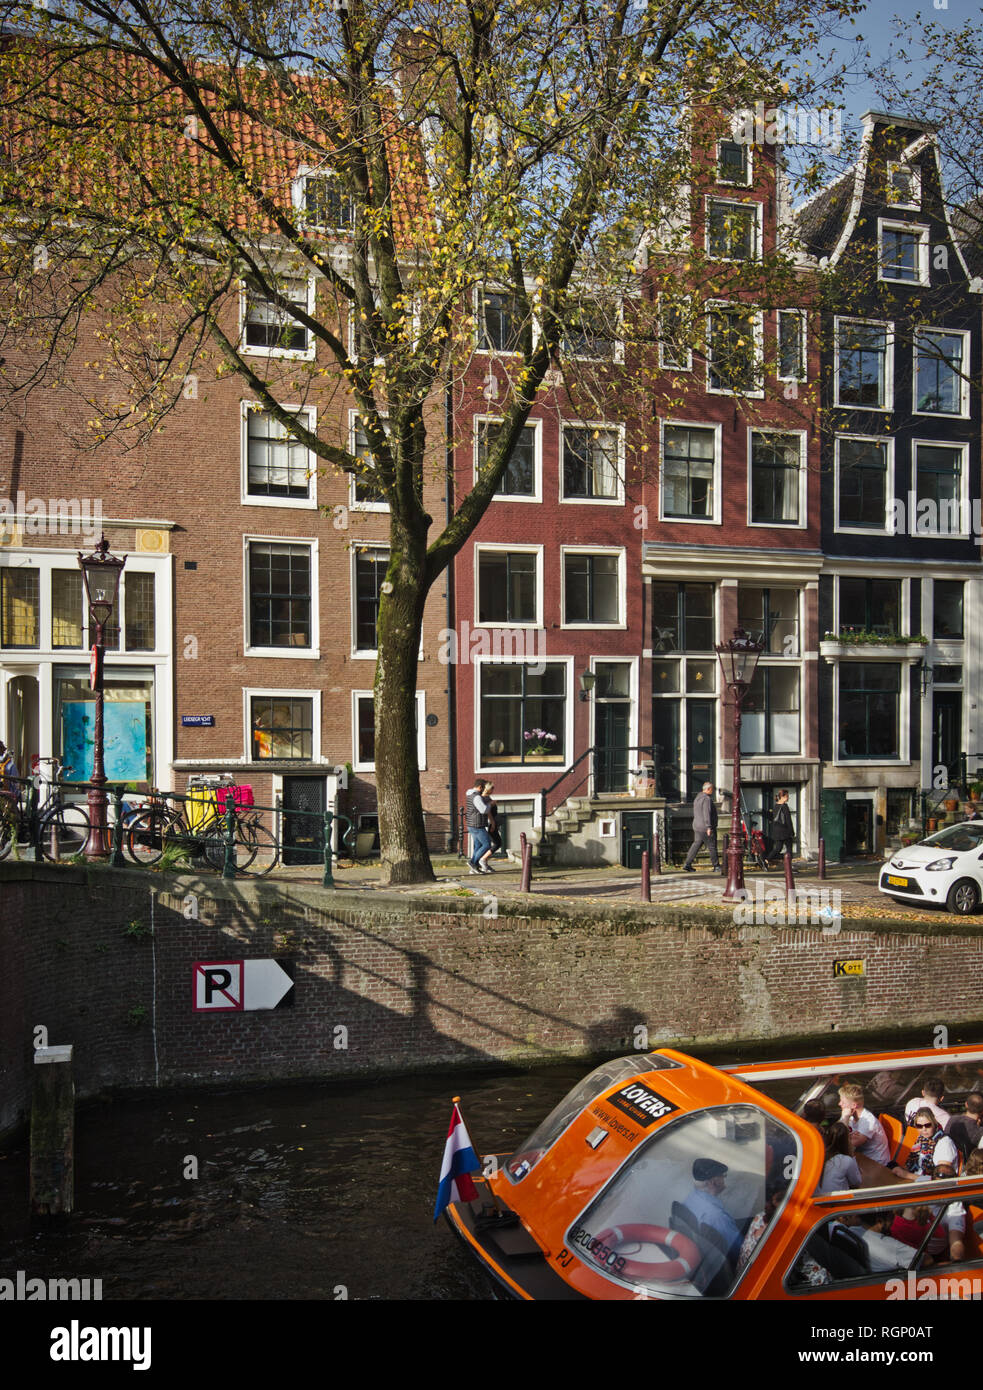 Lovers Canal Cruises and typical Dutch architecture, Amsterdam, Netherlands Stock Photo